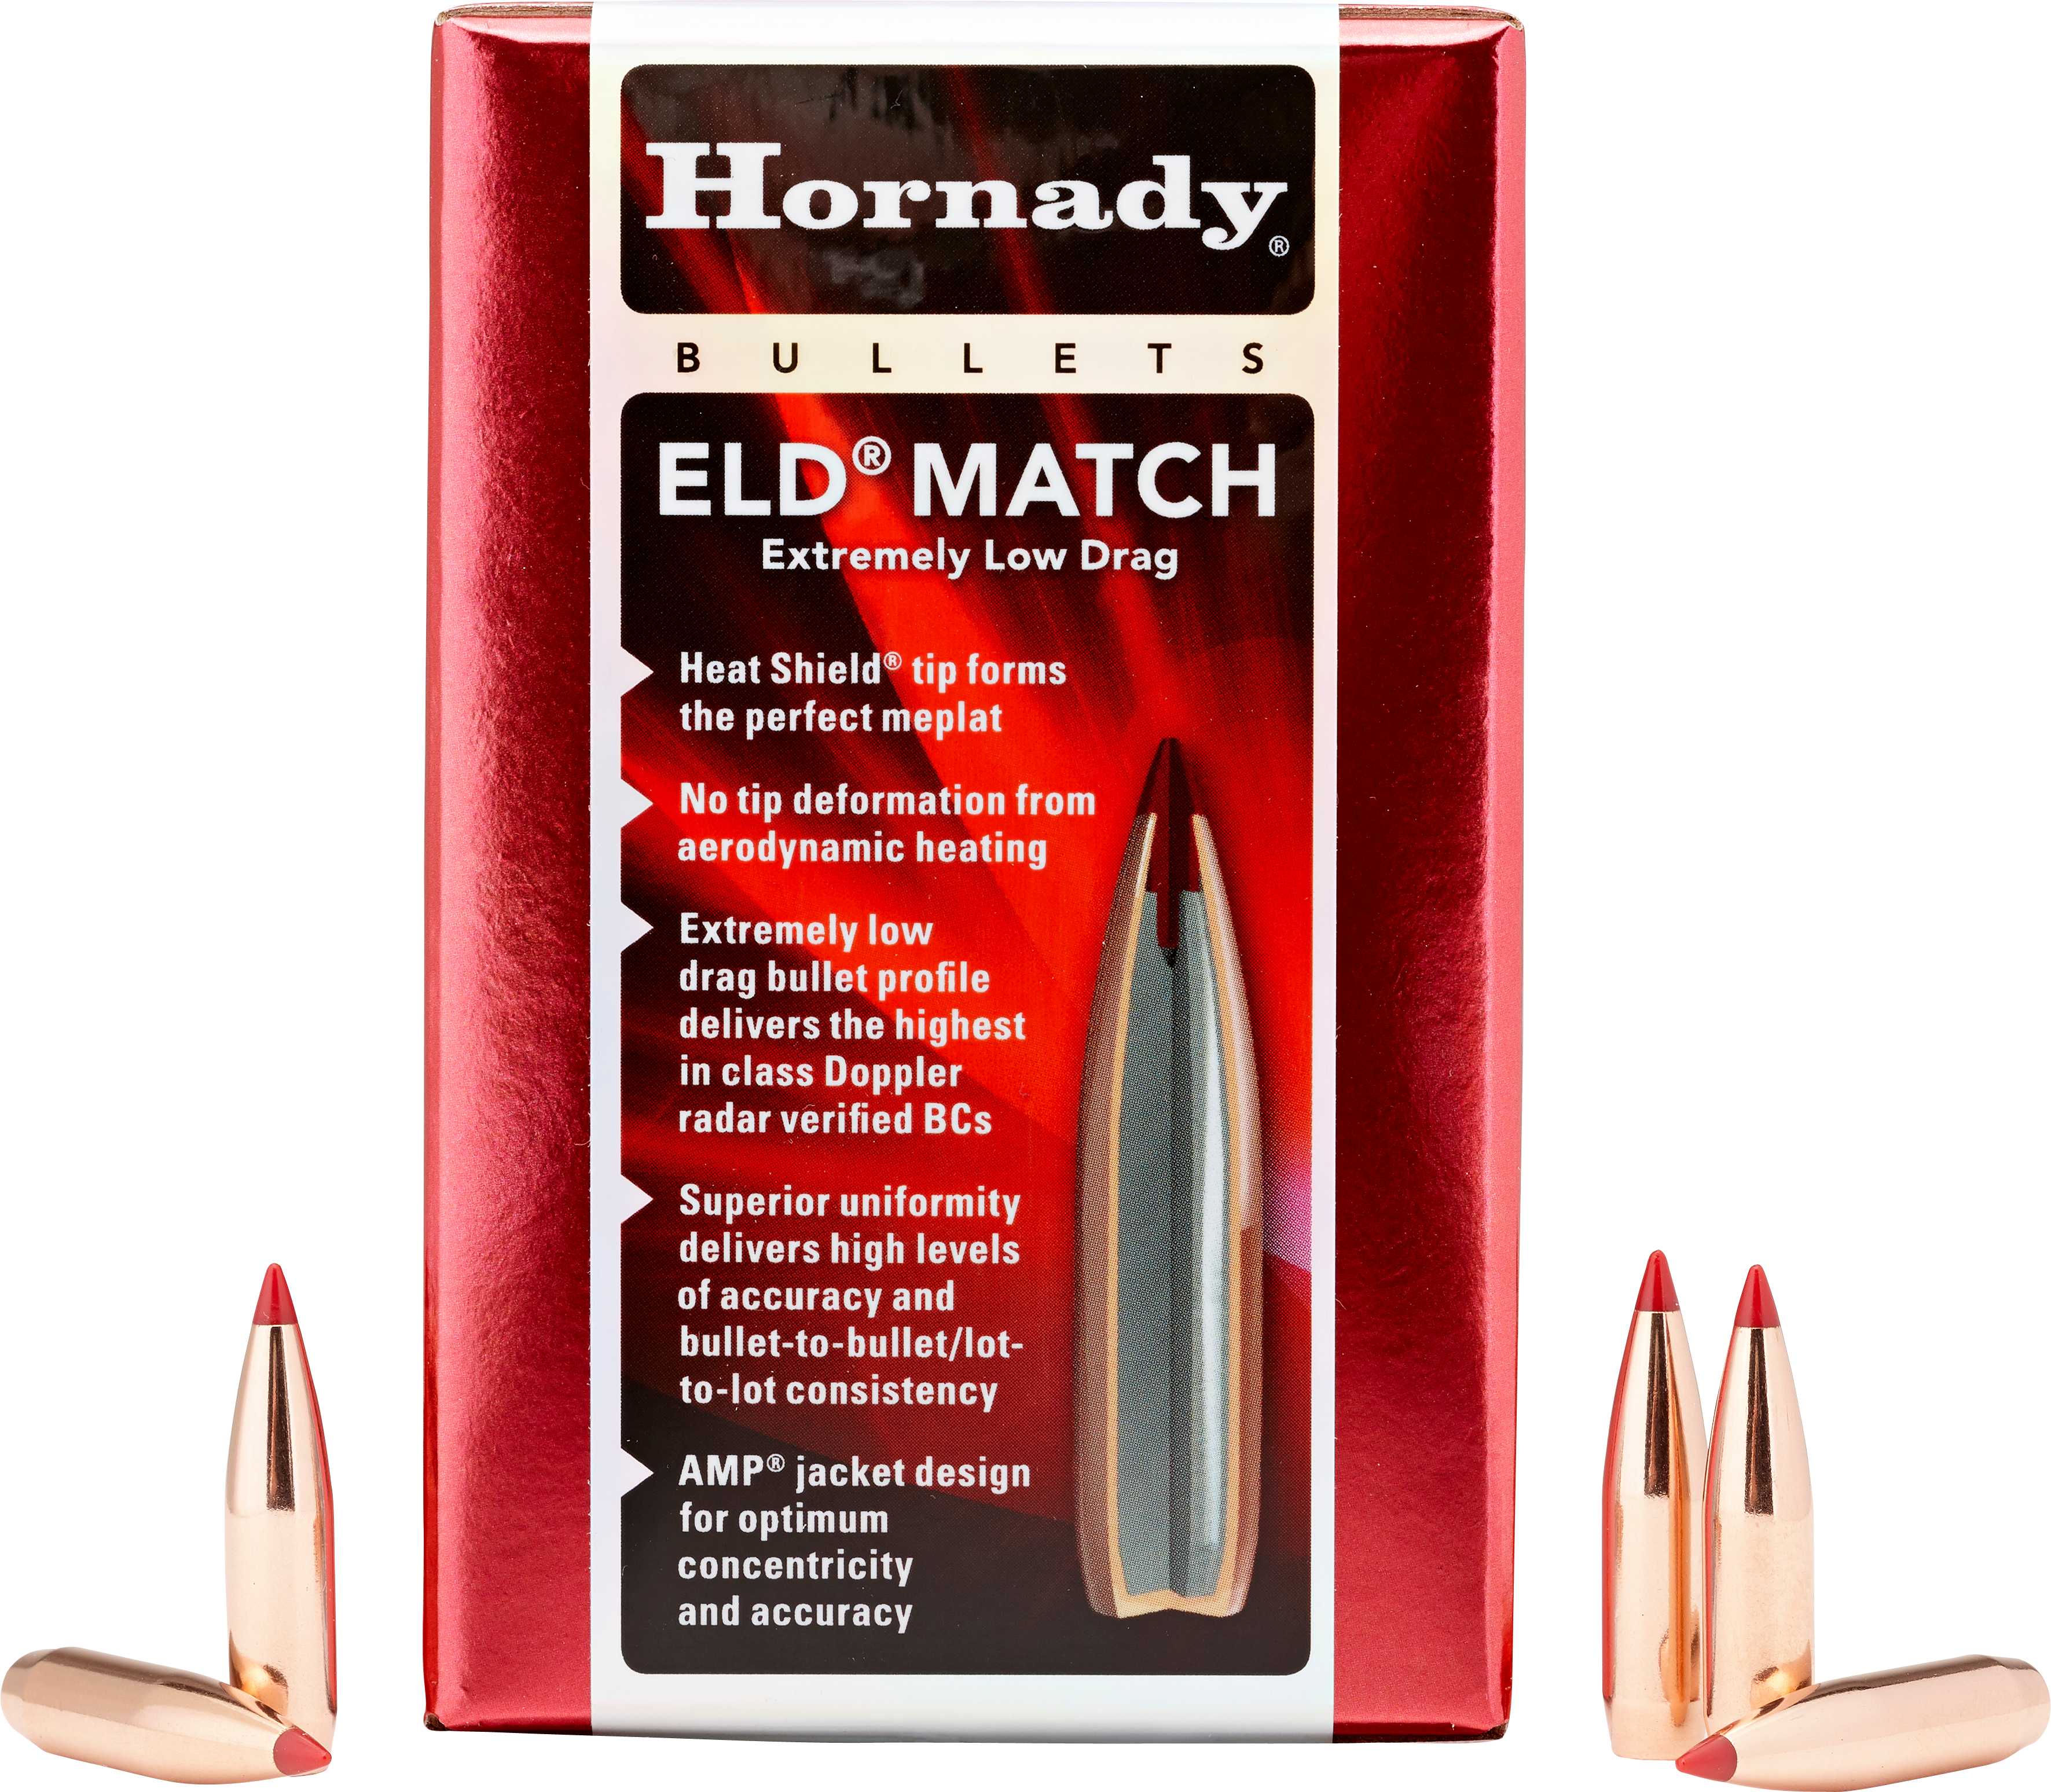 Hornady 338 Caliber Bullets 285 Grain Boat Tail ELD Match, 50 Count Md: 33381